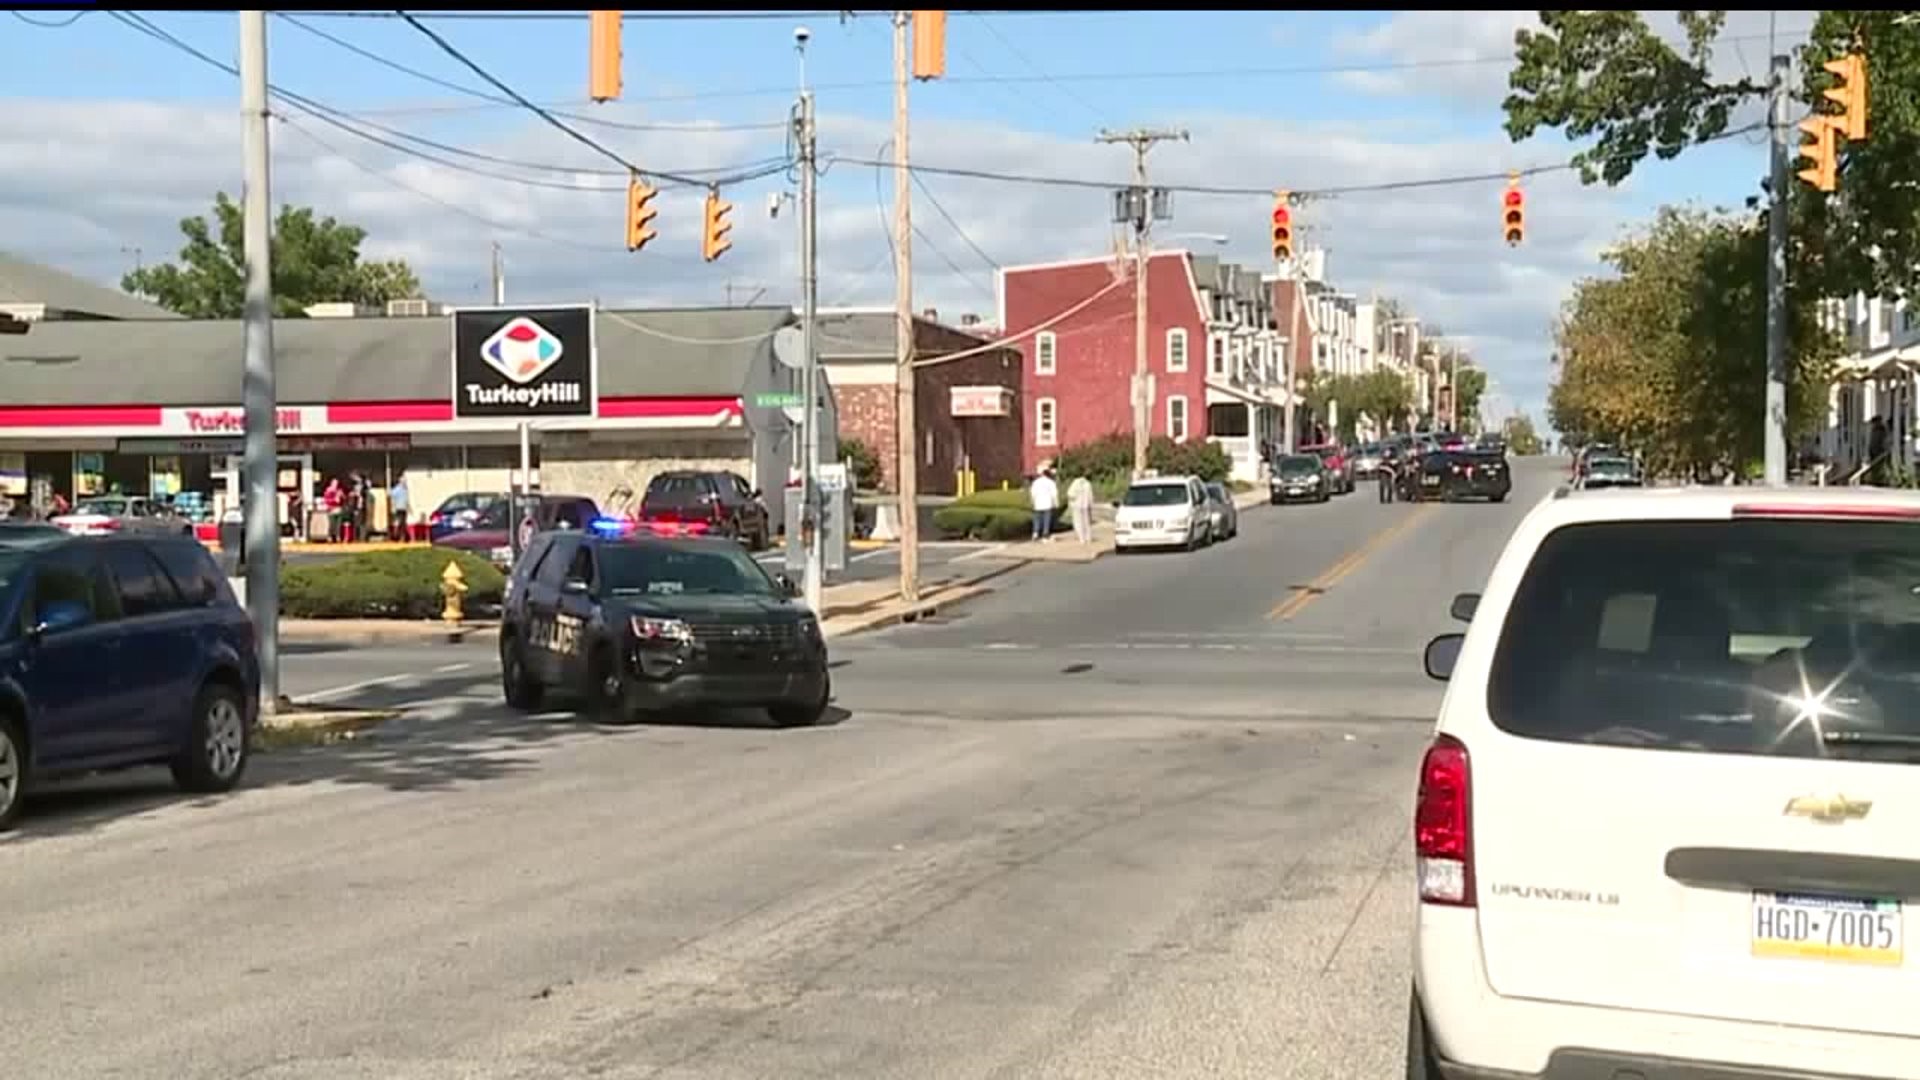 Police investigating car crash and shots fired incident in York